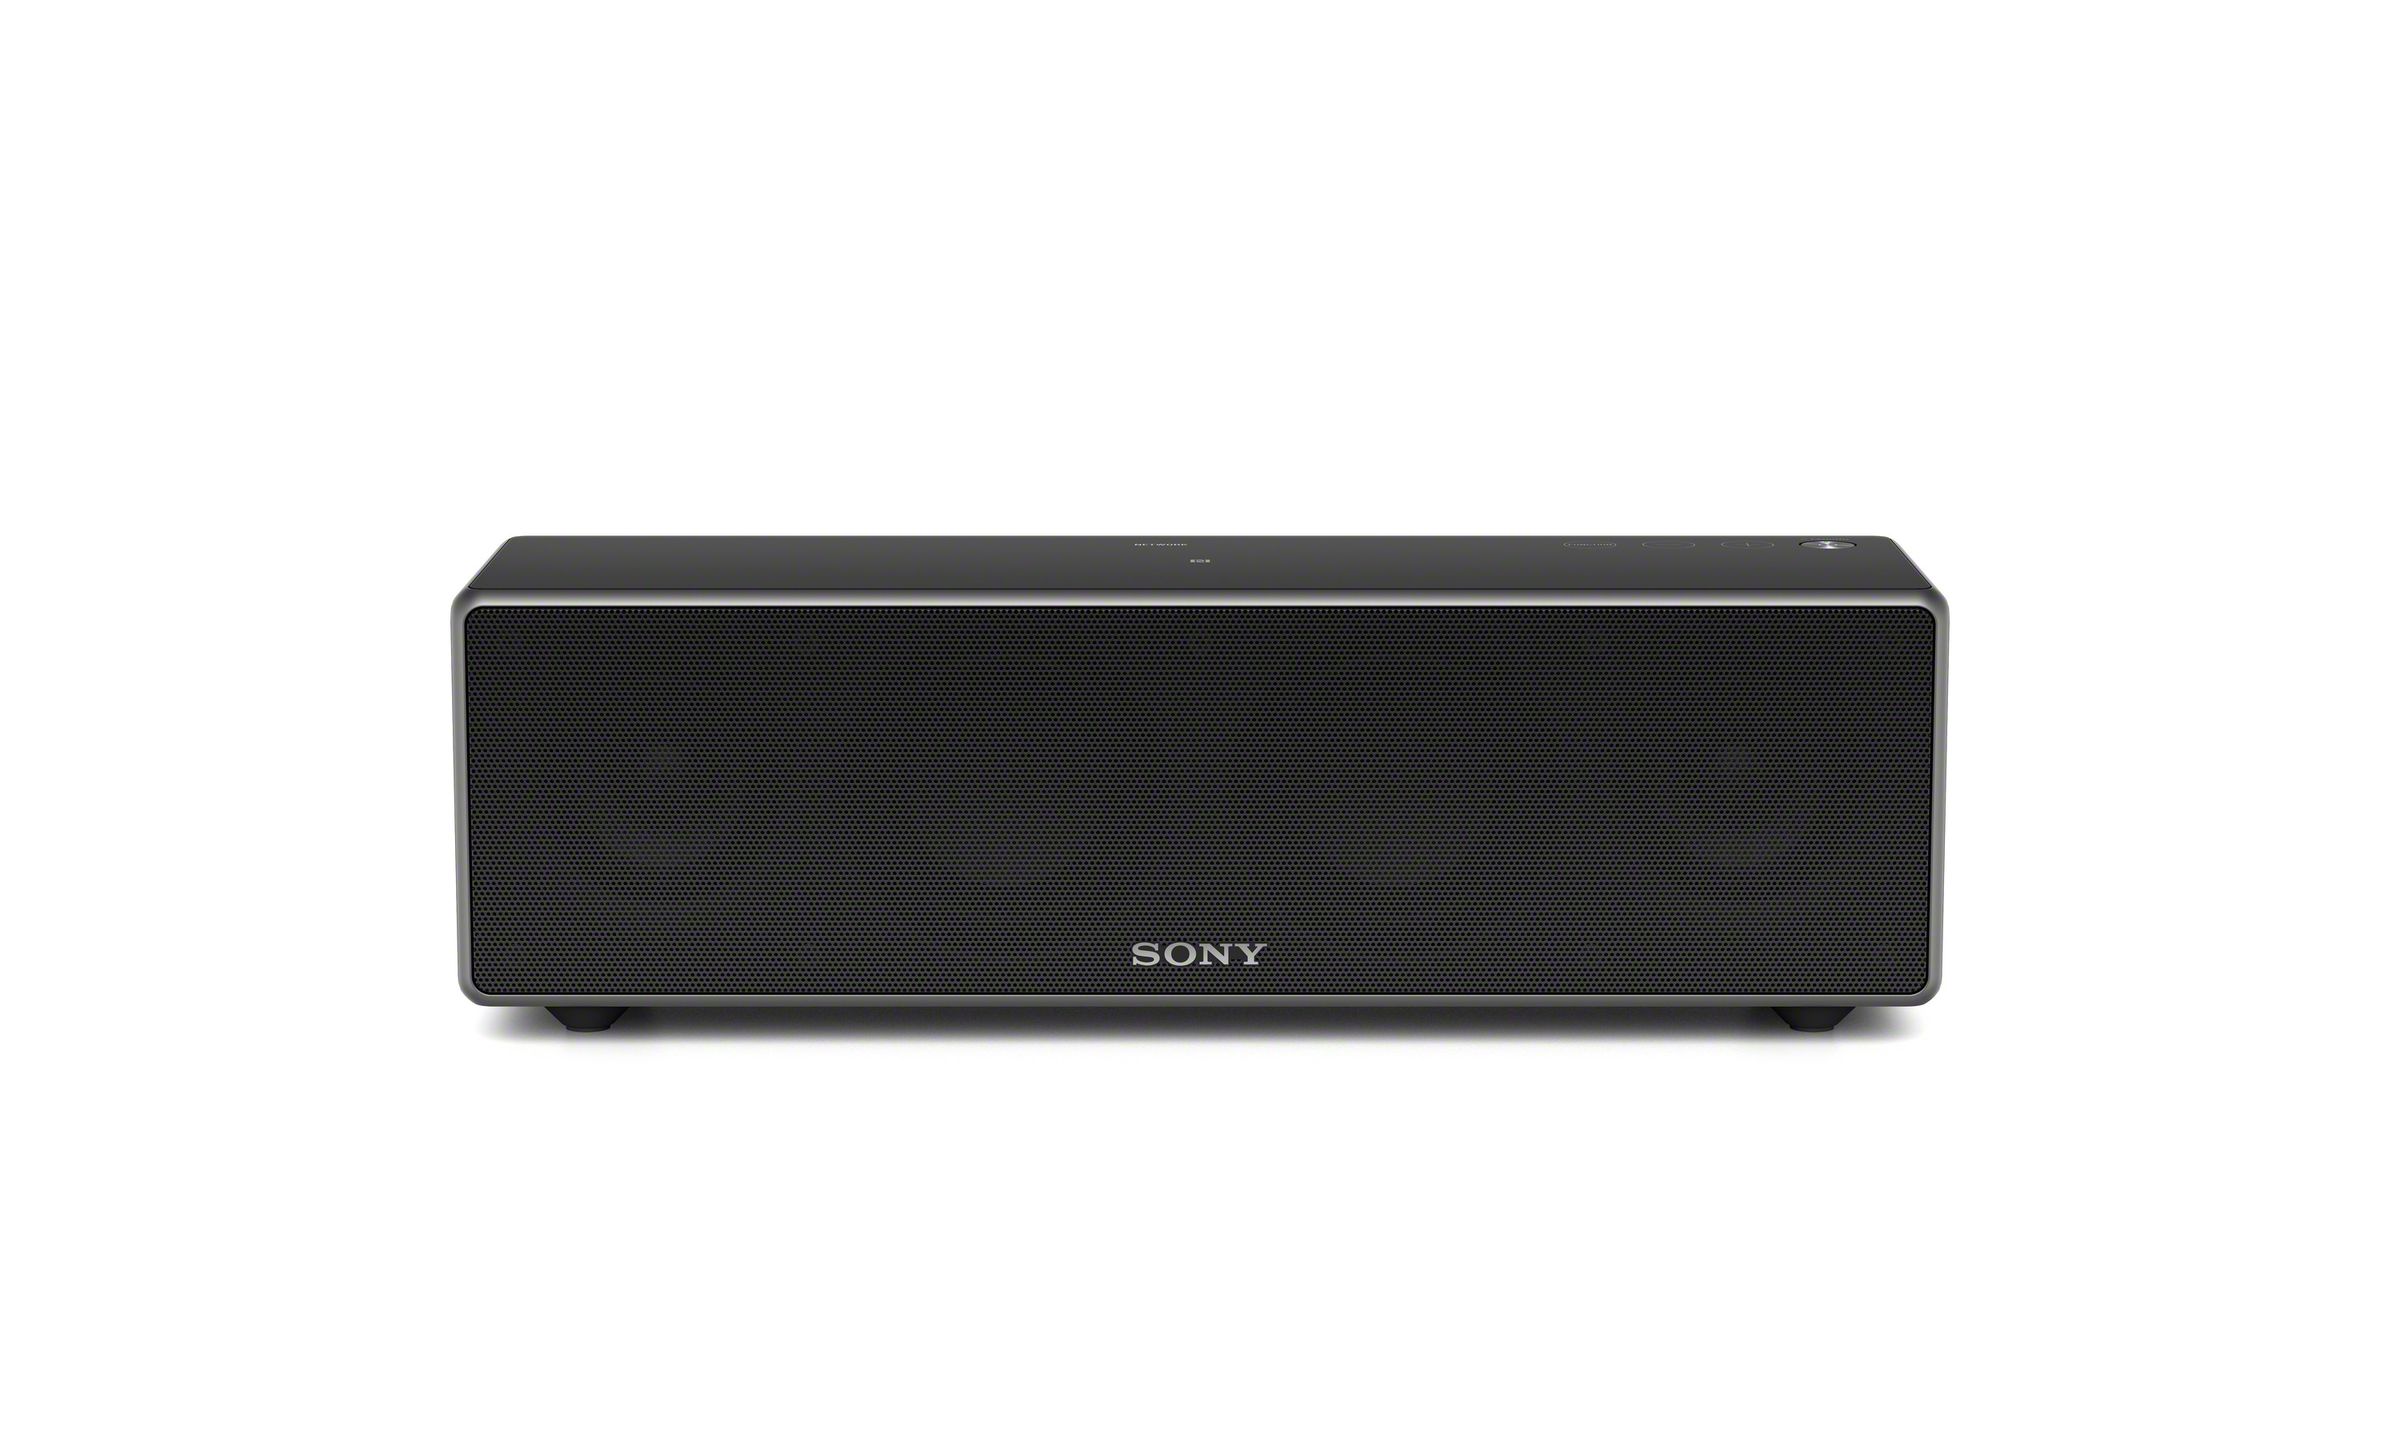 Sony's wireless speakers at CES 2016